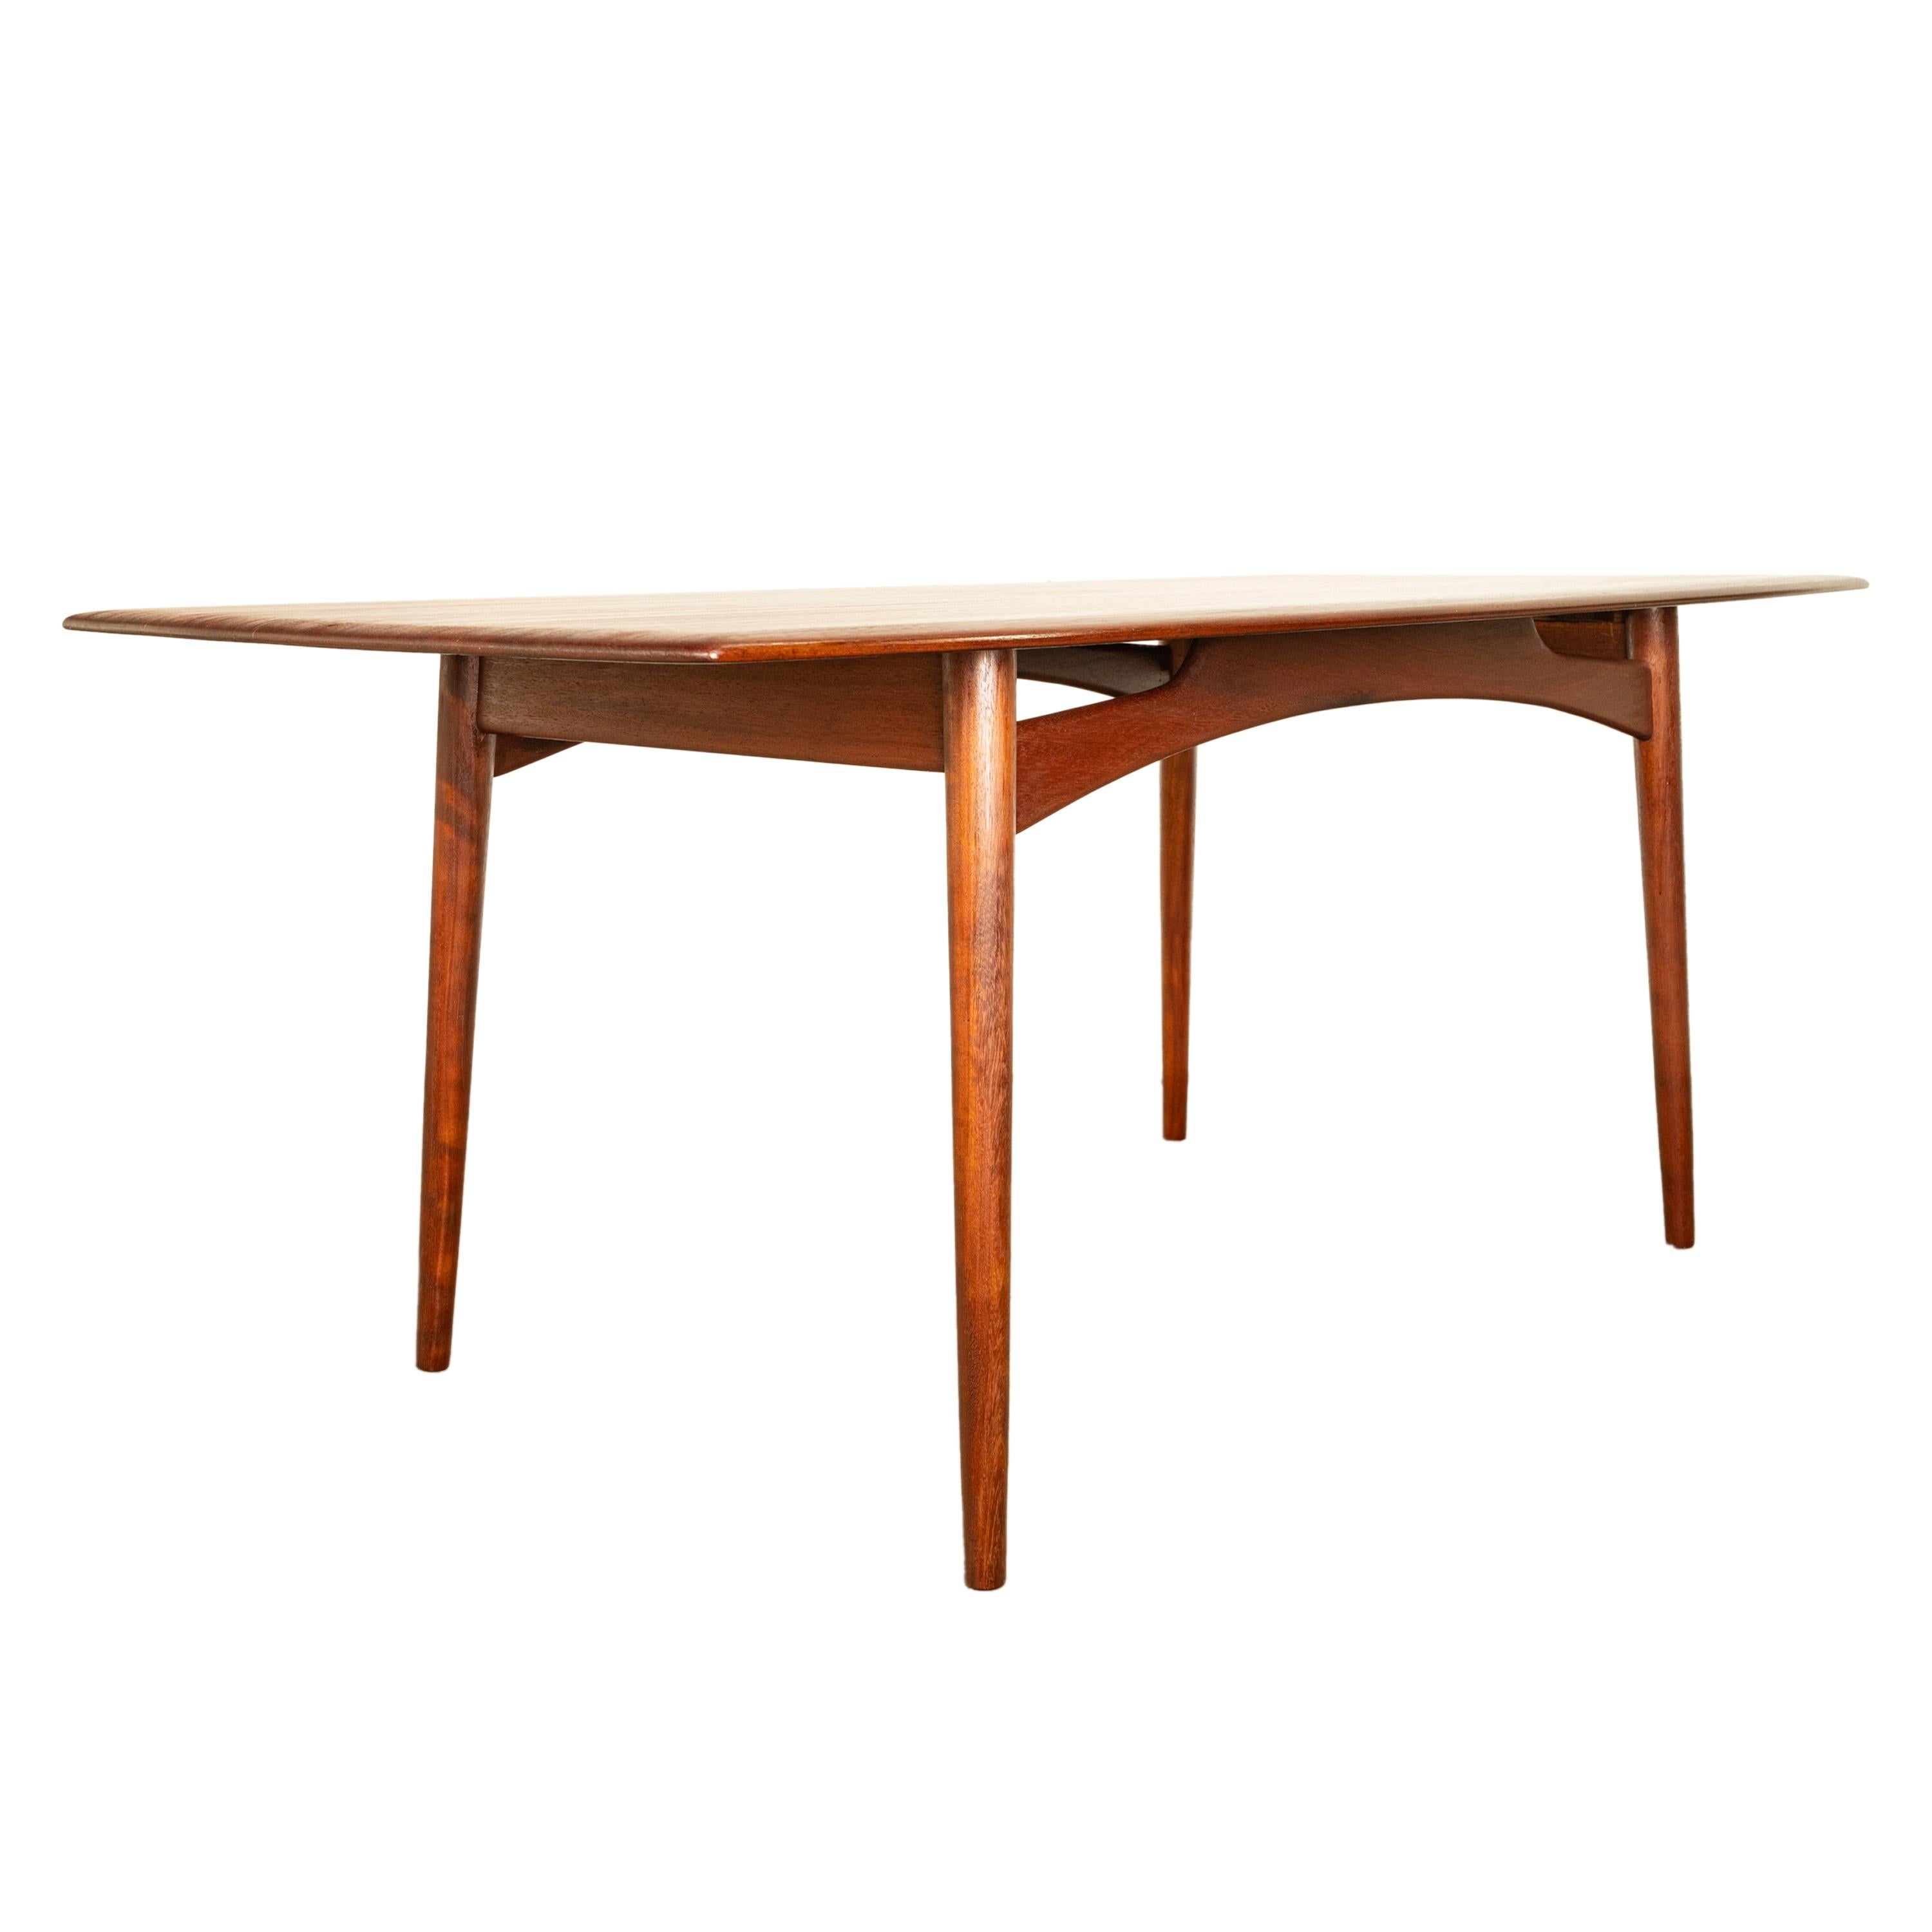 Mid-20th Century Mid Century Modern Danish Style Solid Teak Afromosia 8 Seat Dining Table 1960 For Sale